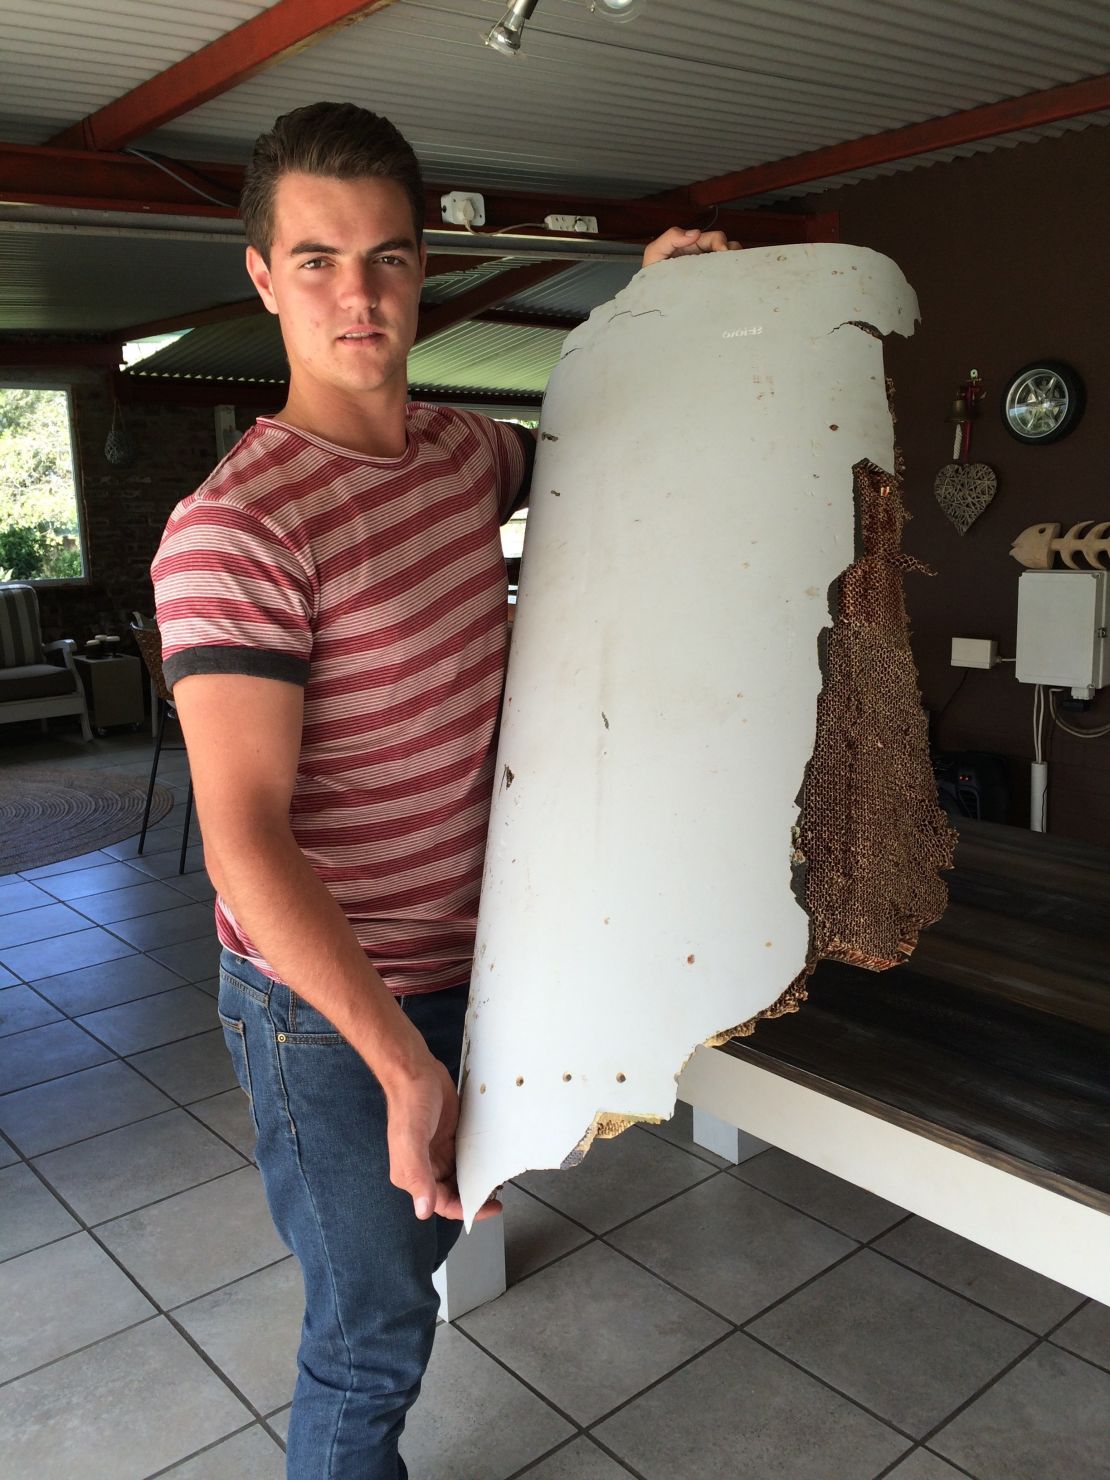 South African teen Liam Lotter holding the debris he found on a Mozambique beach.